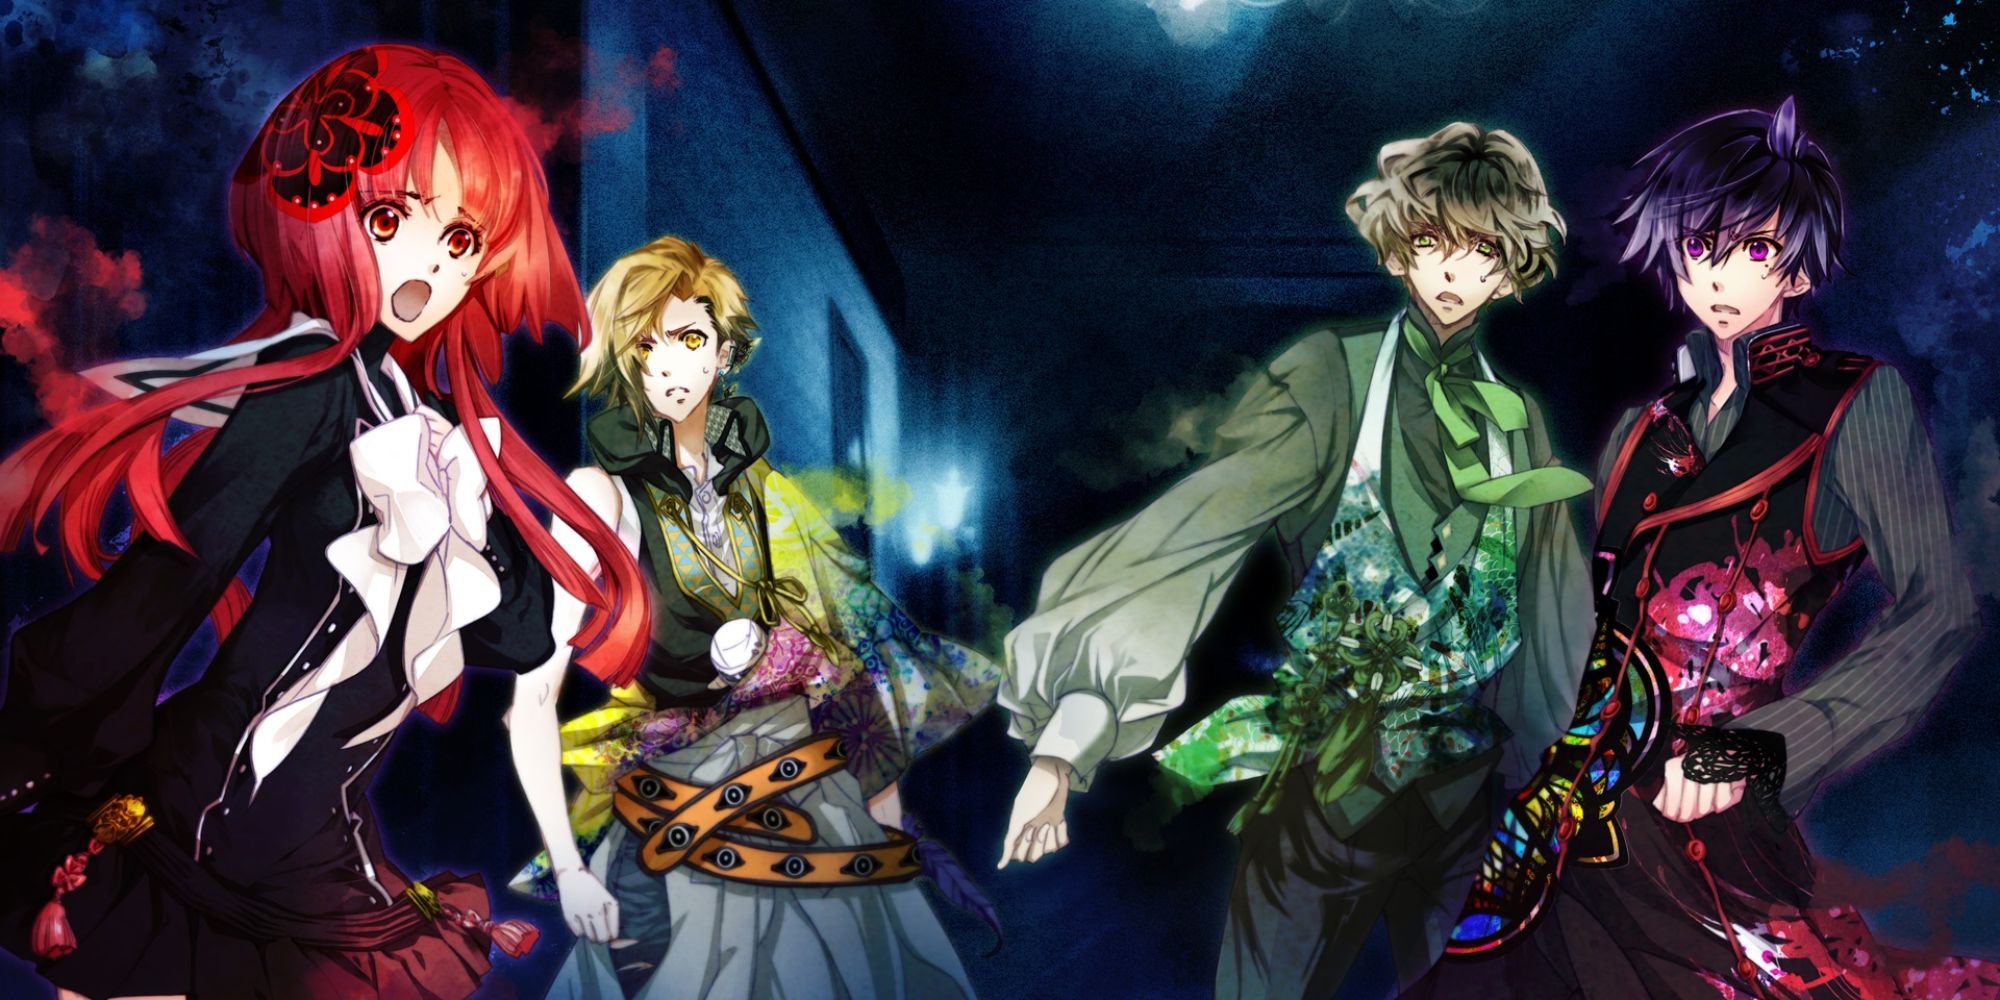 Psychedelica of The Black Butterfly Steam Otome Game